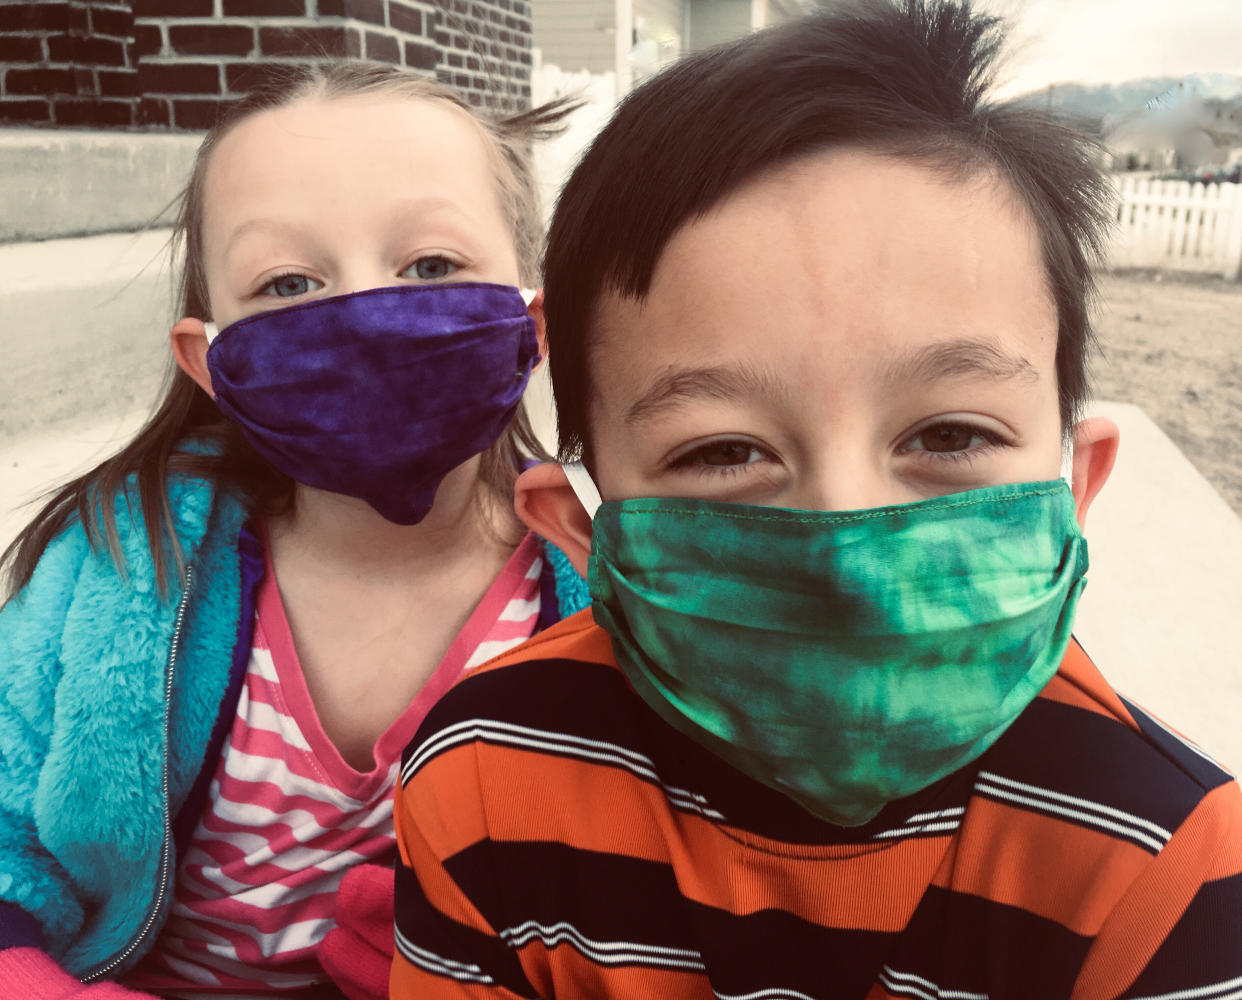 Getting kids to wear masks can be a struggle. Paying close attention to fit and comfort can help.  (Photo: Tamilisa Miner via Getty Images)